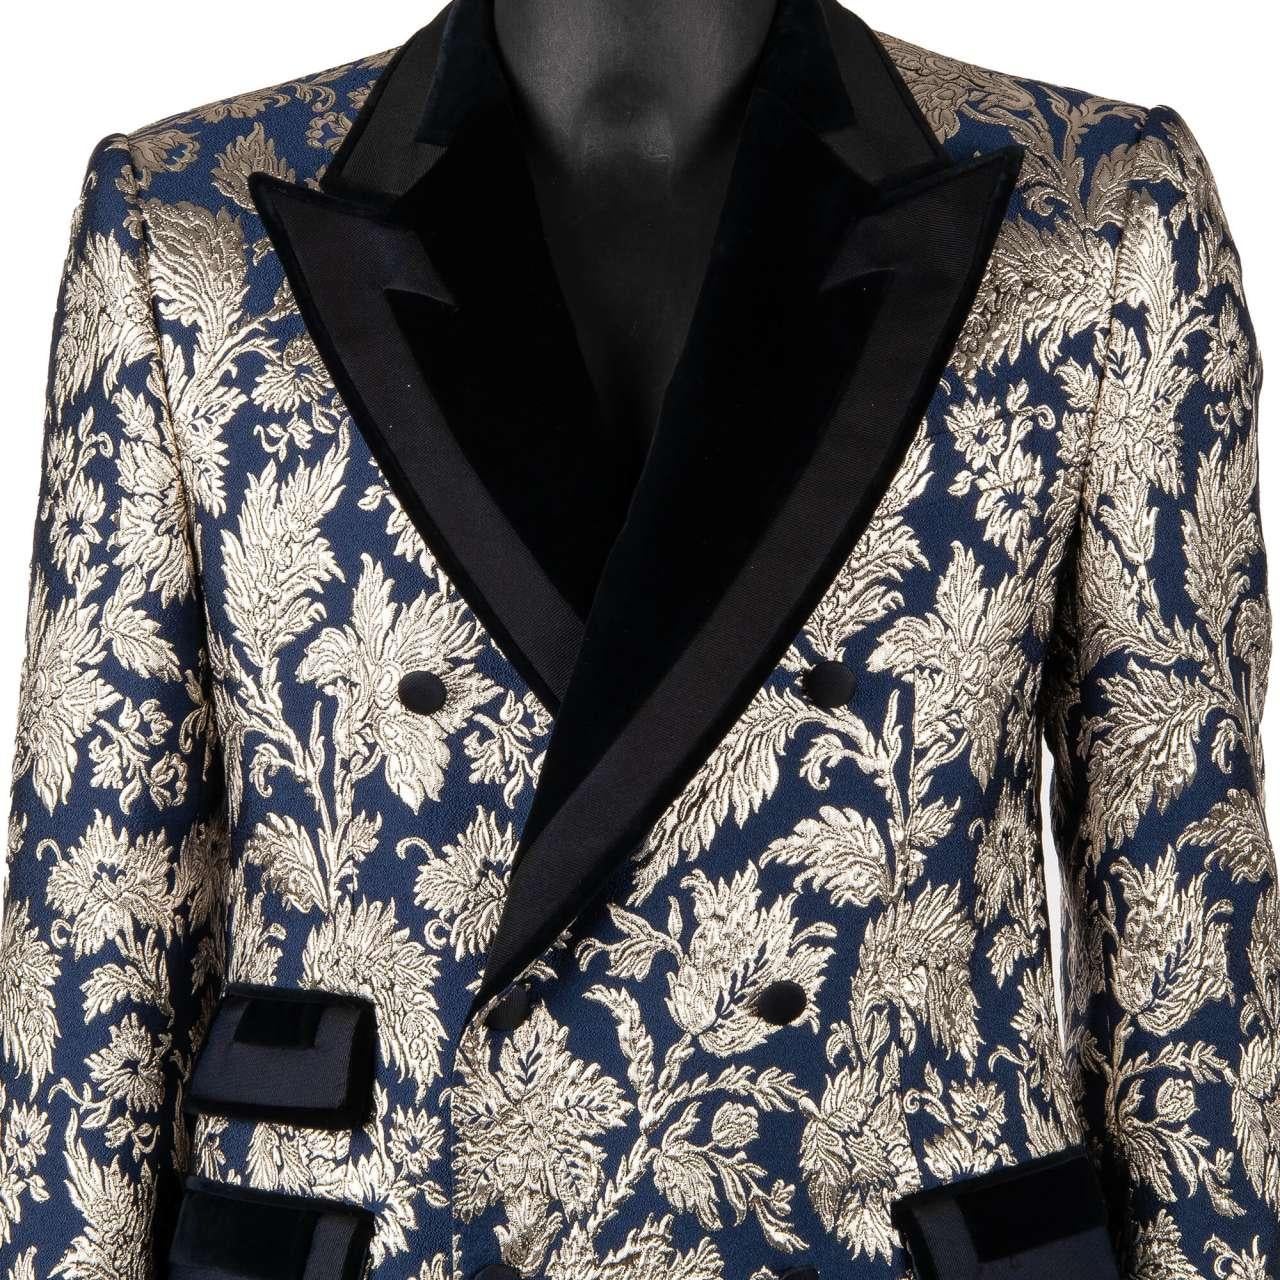 Dolce & Gabbana - Flower Jacquard Double breasted Suit Silver Blue 48 For Sale 2